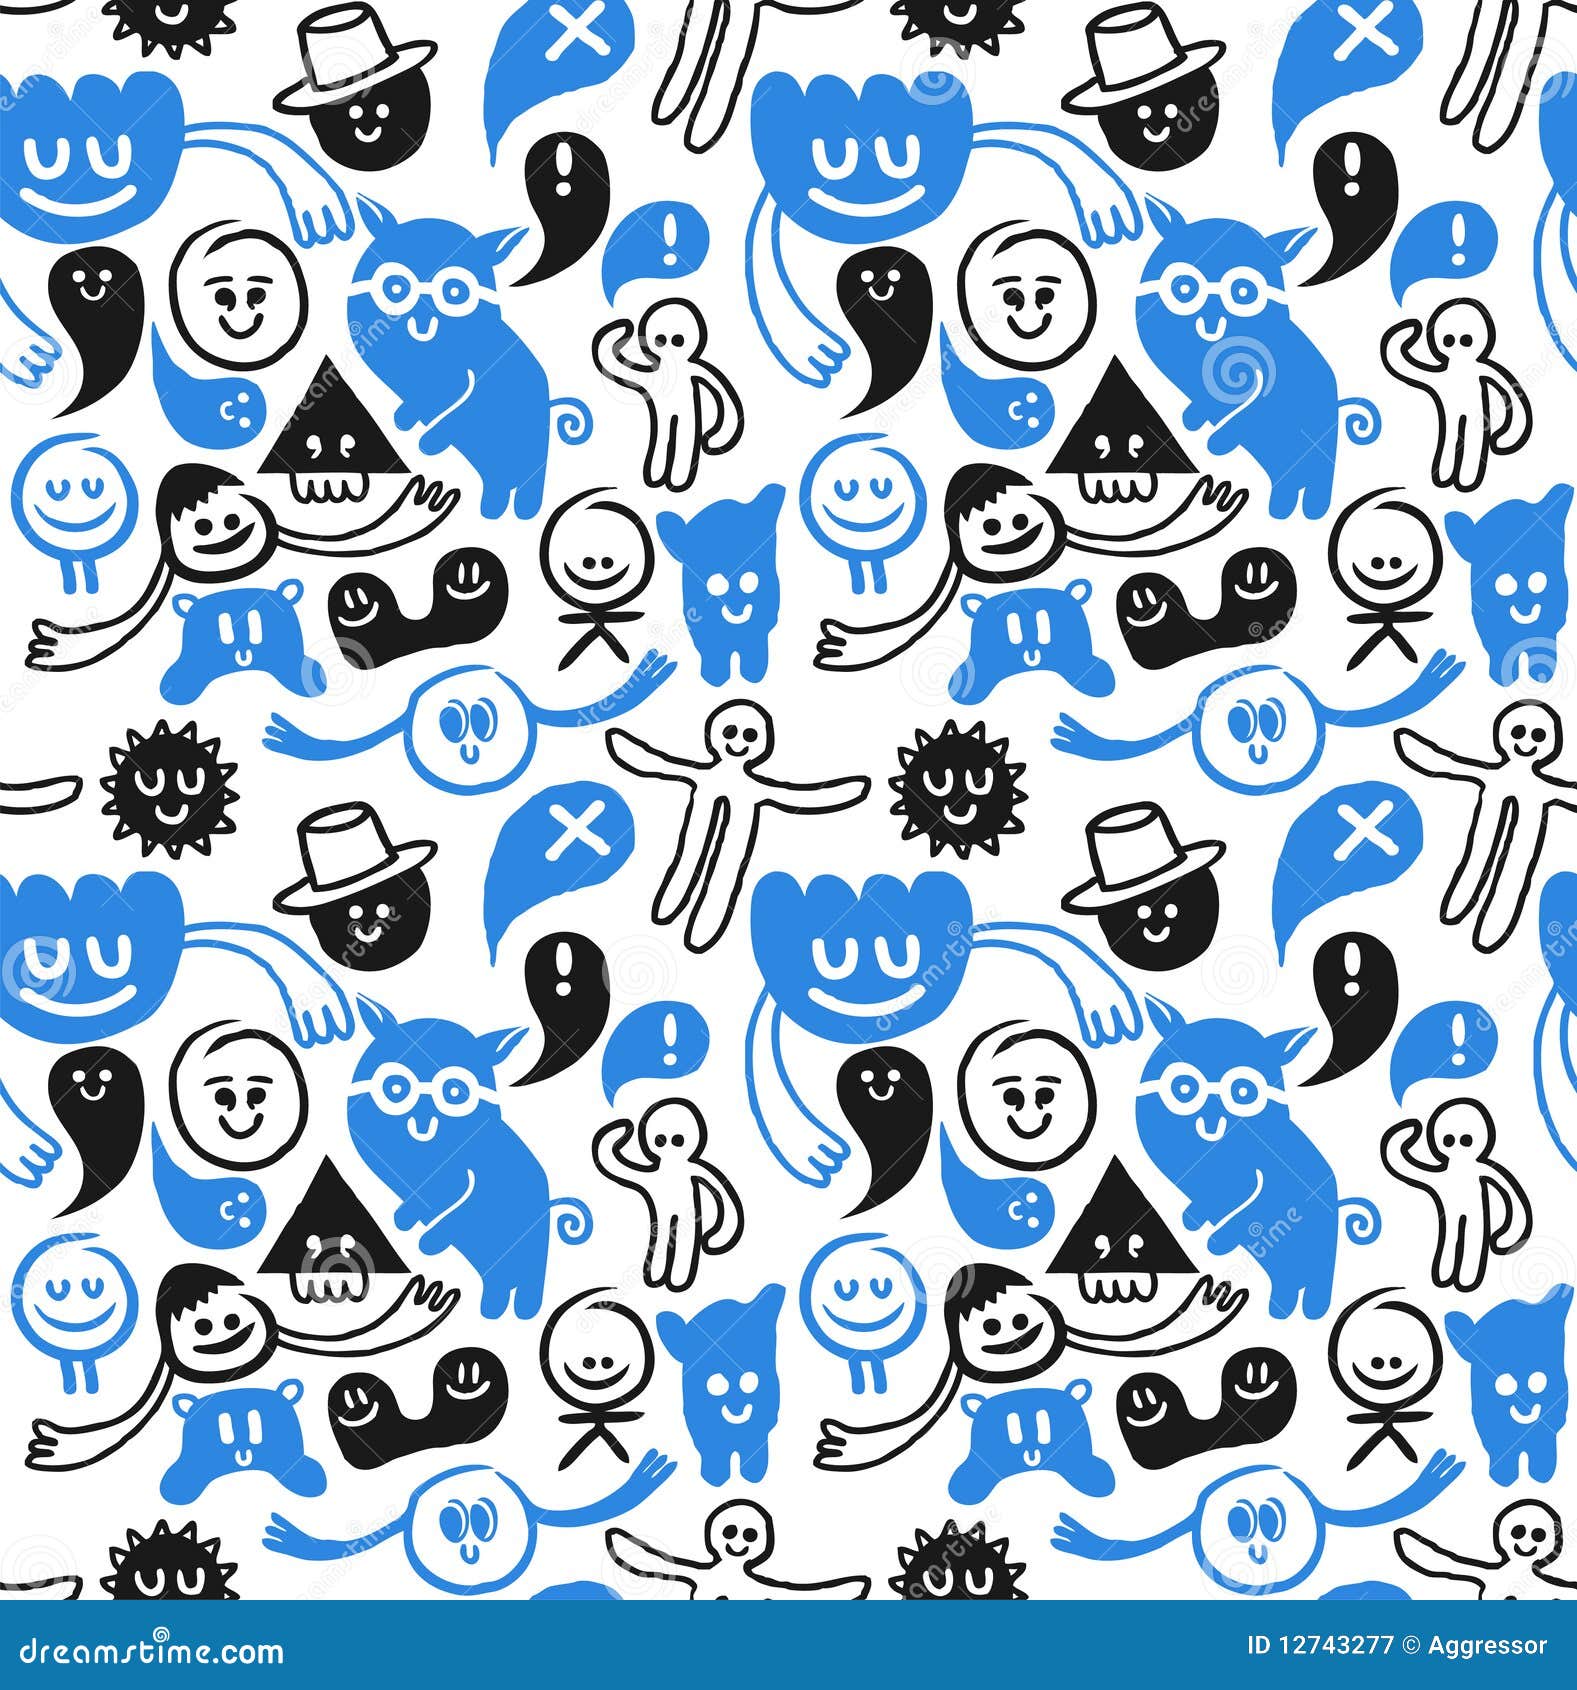 Funny seamless doodles stock vector. Illustration of expressions - 12743277